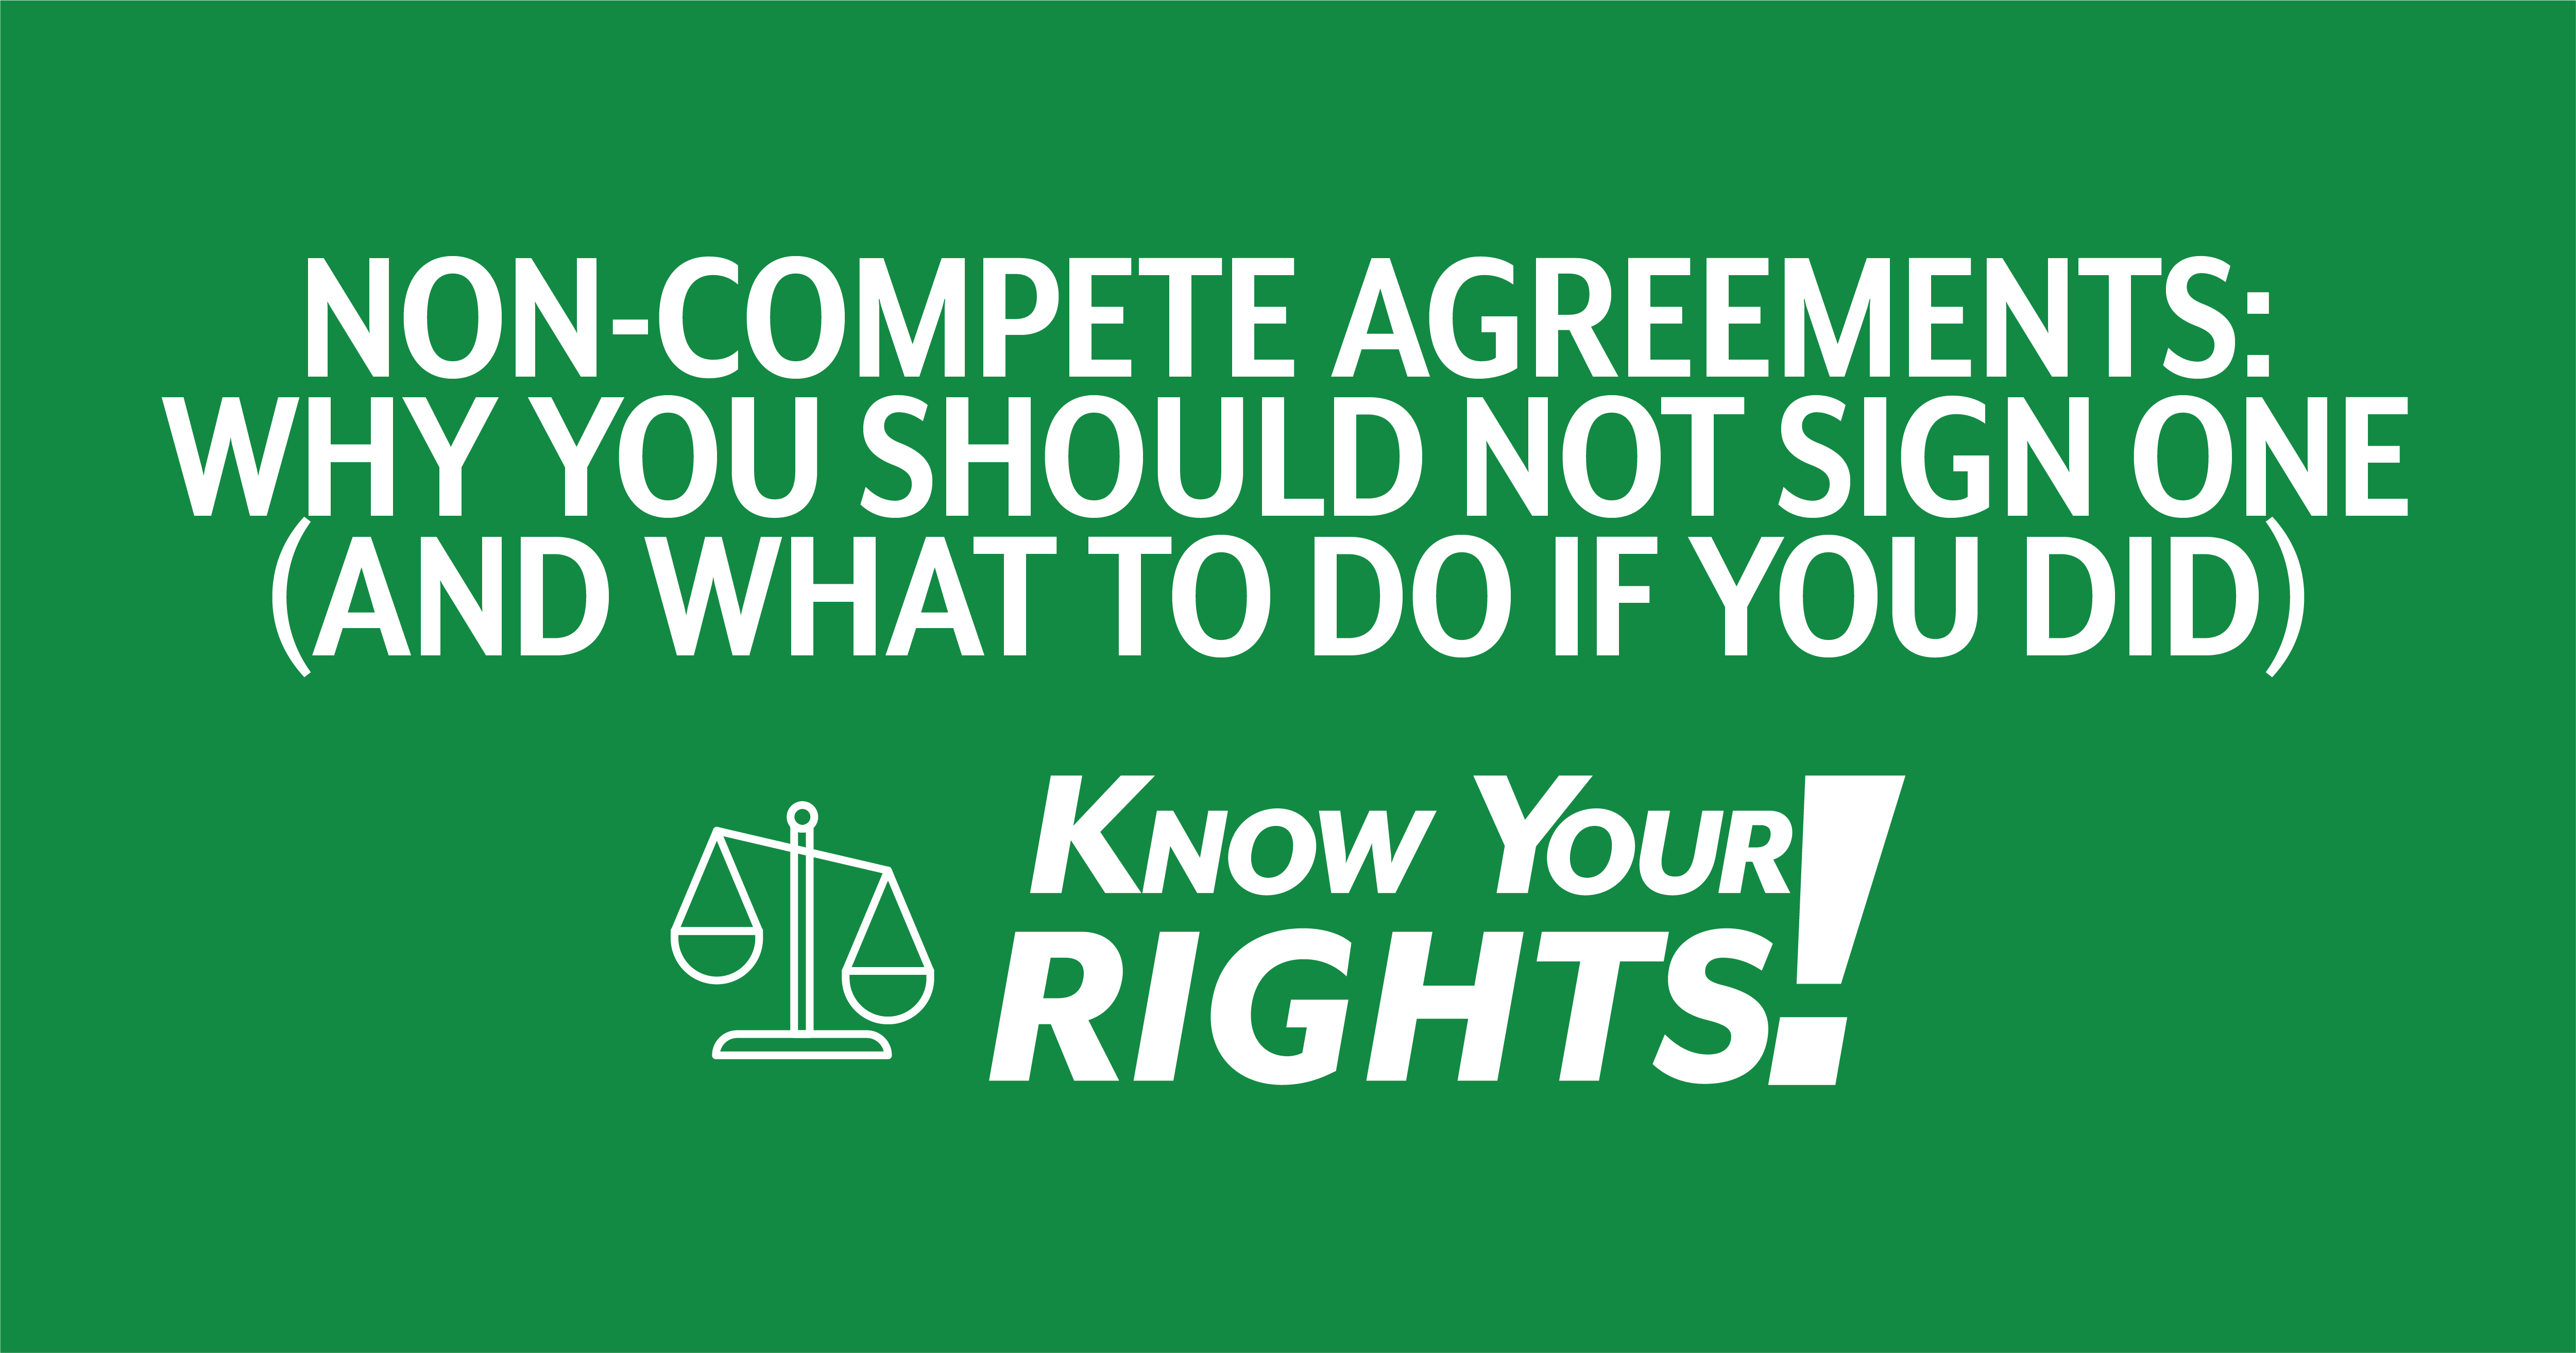 Non compete Agreements: Why You Should Not Sign One (and What to Do If